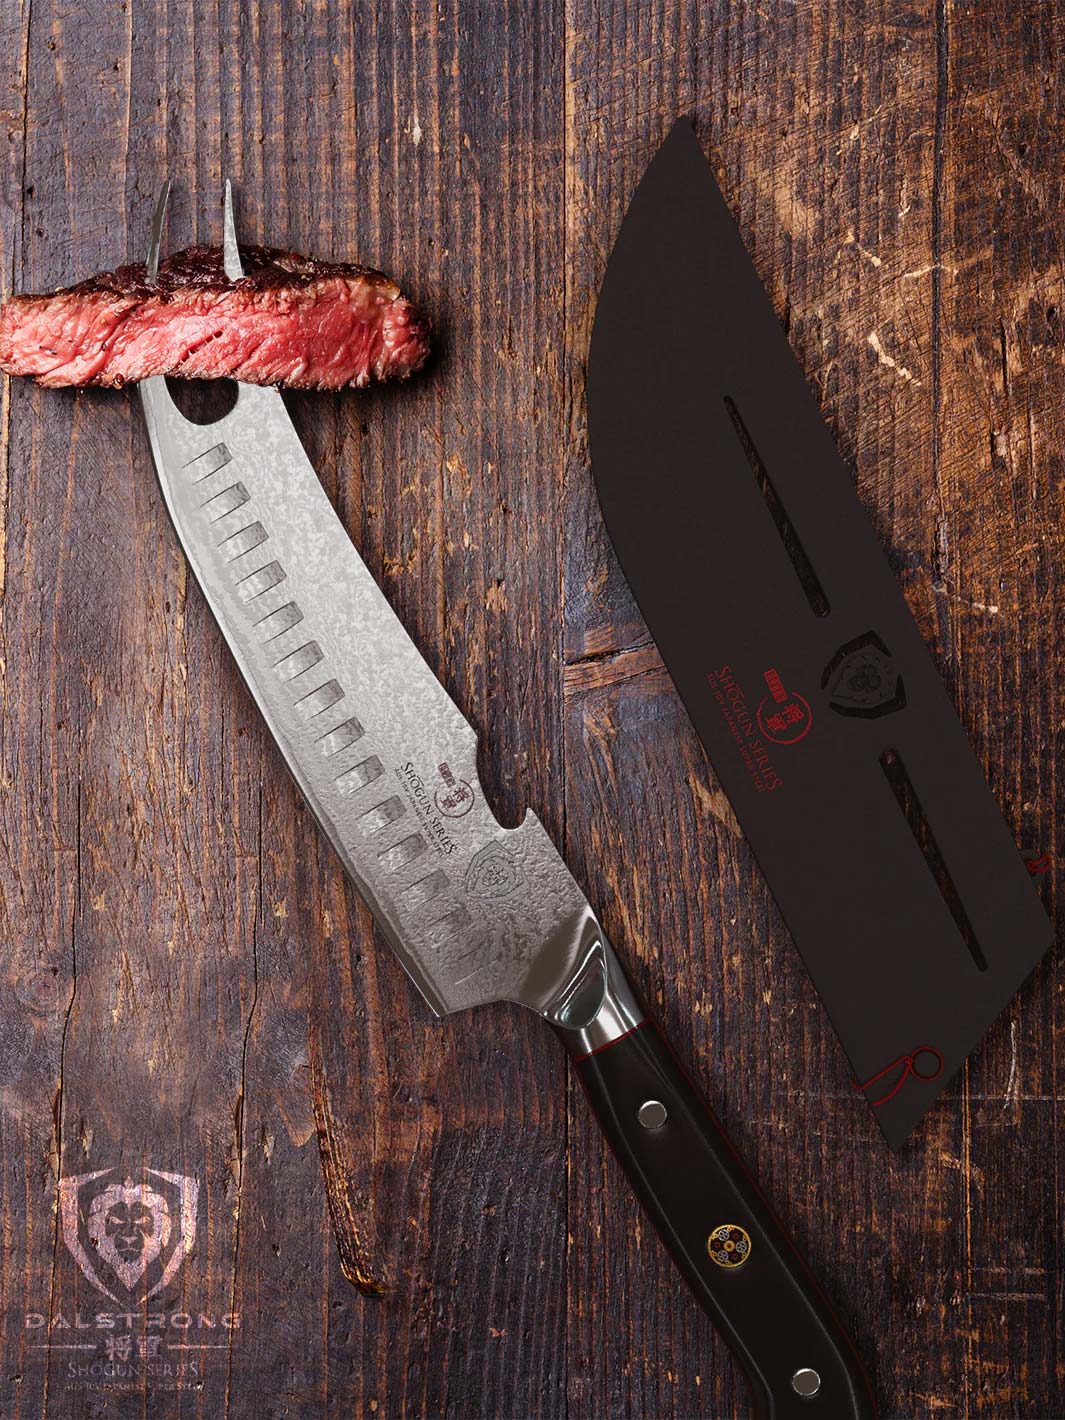 BBQ Pitmaster Knife 6.5 | Call of Duty © Edition | Forked Tip & Bottle  Opener | EXCLUSIVE COLLECTOR KNIFE | Dalstrong ©